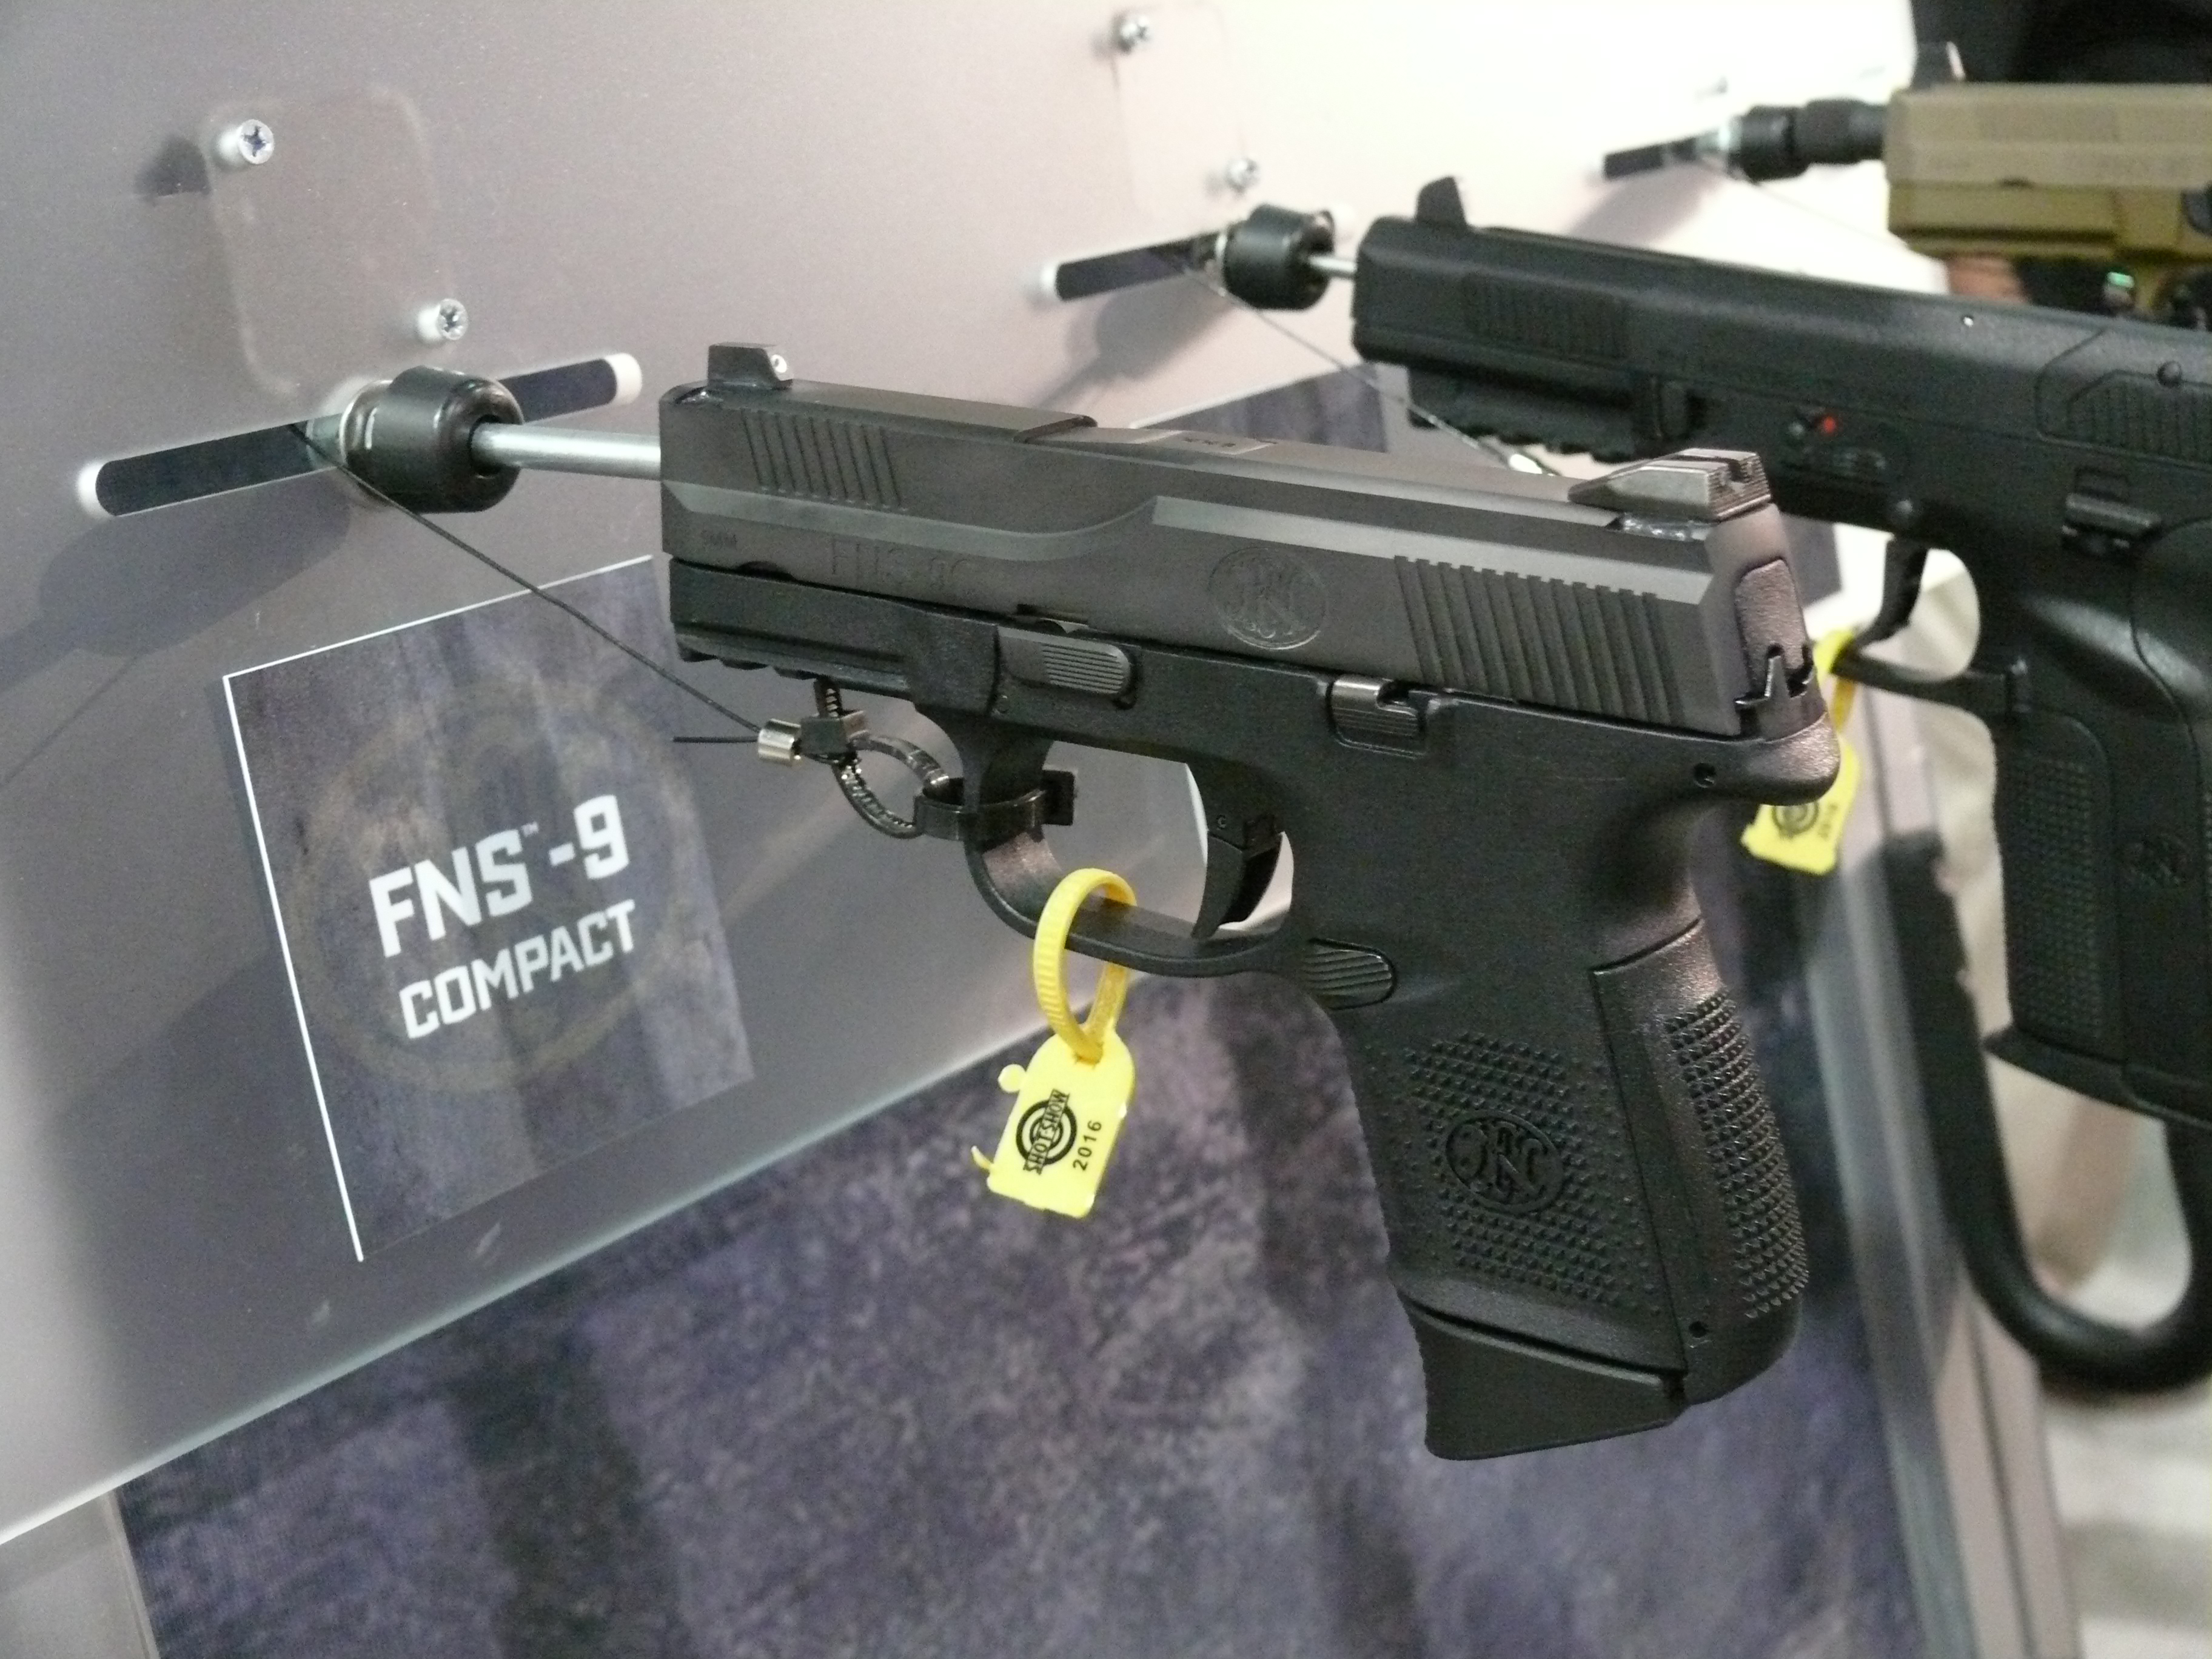 FNS-9